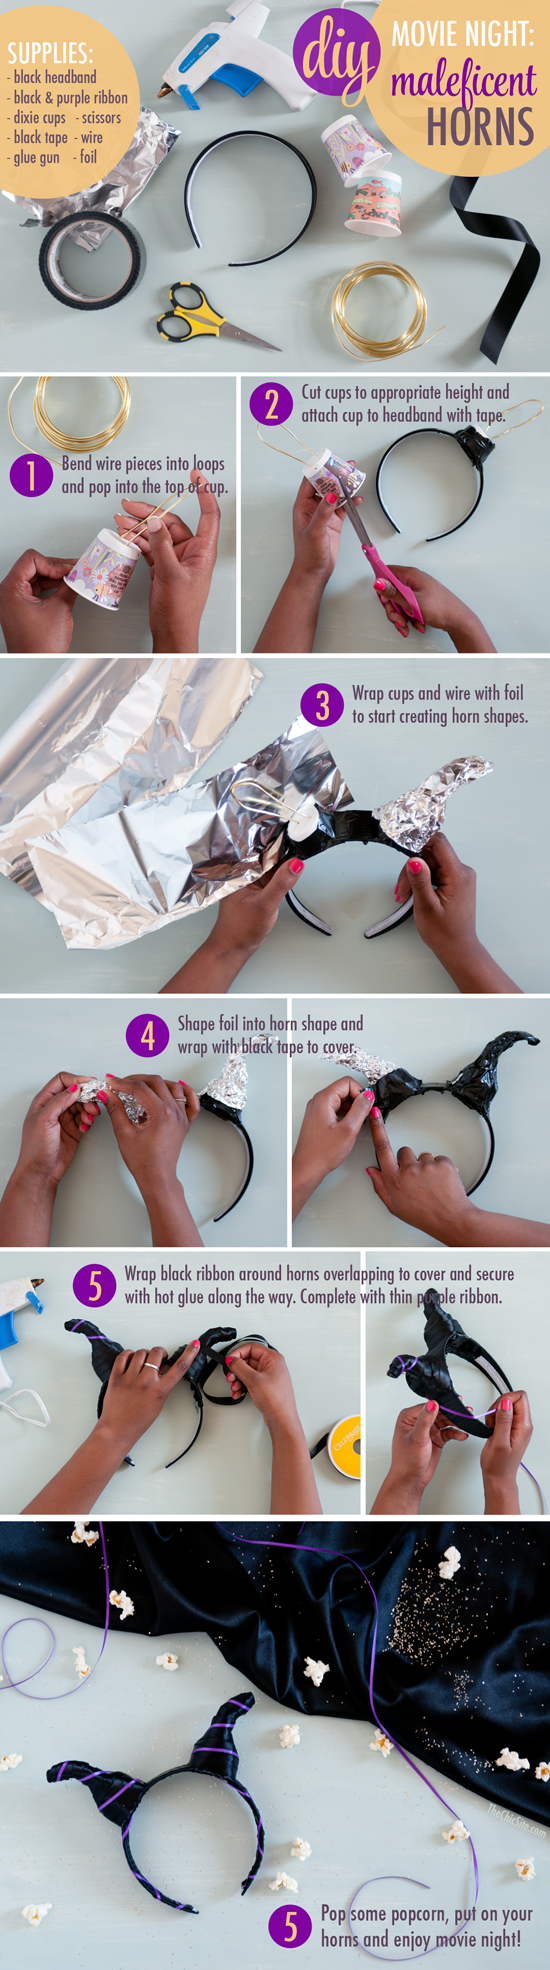 How to make Maleficent Horns at Home